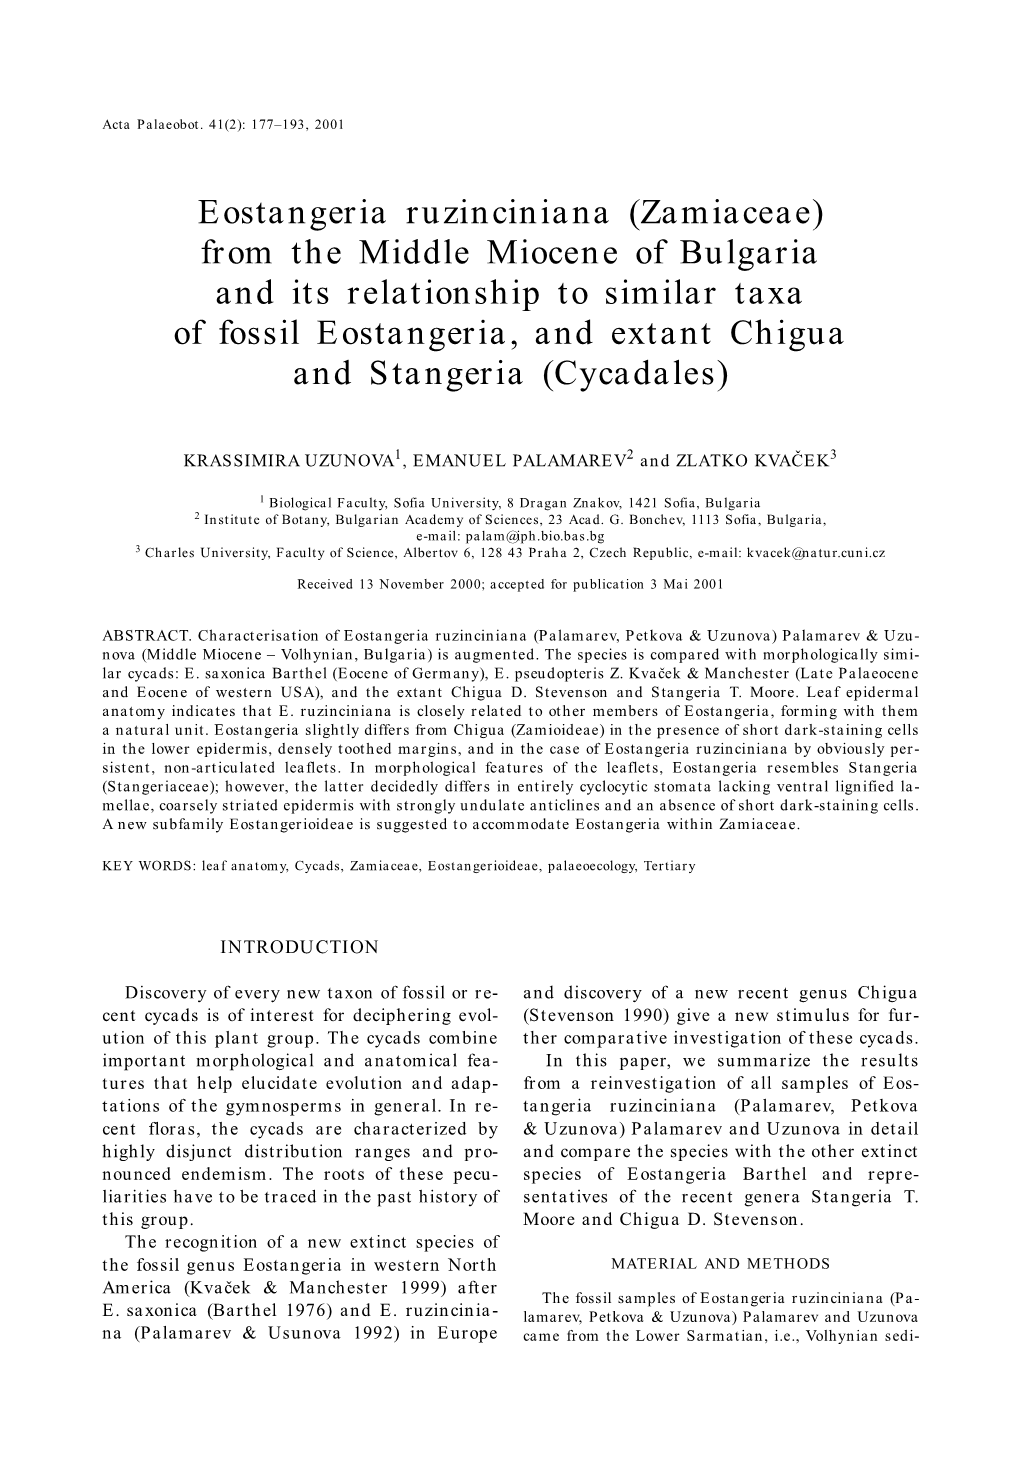 Eostangeria Ruzinciniana (Zamiaceae) from the Middle Miocene of Bulgaria and Its Relationship to Similar Taxa of Fossil Eostang